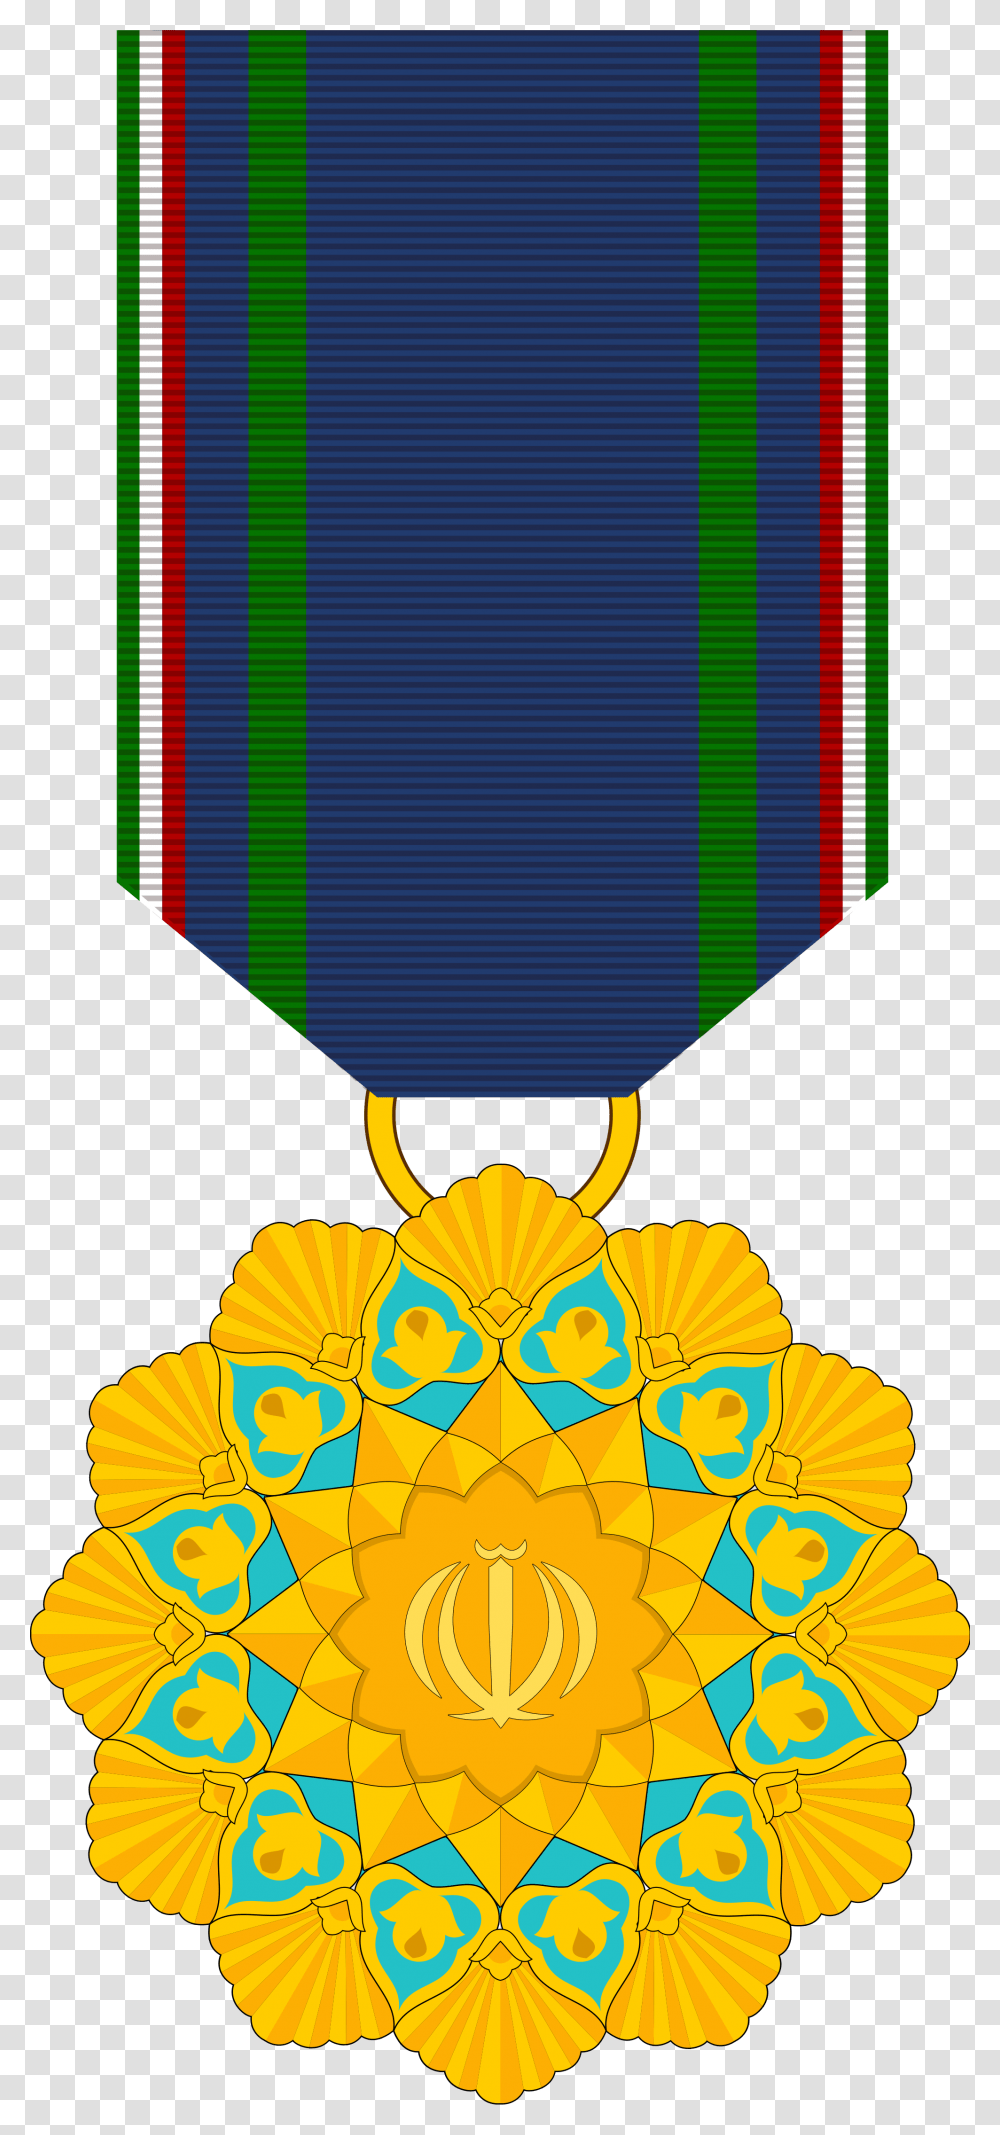 Islamic Republic Medal Of Honor, Gold, Trophy, Gold Medal Transparent Png